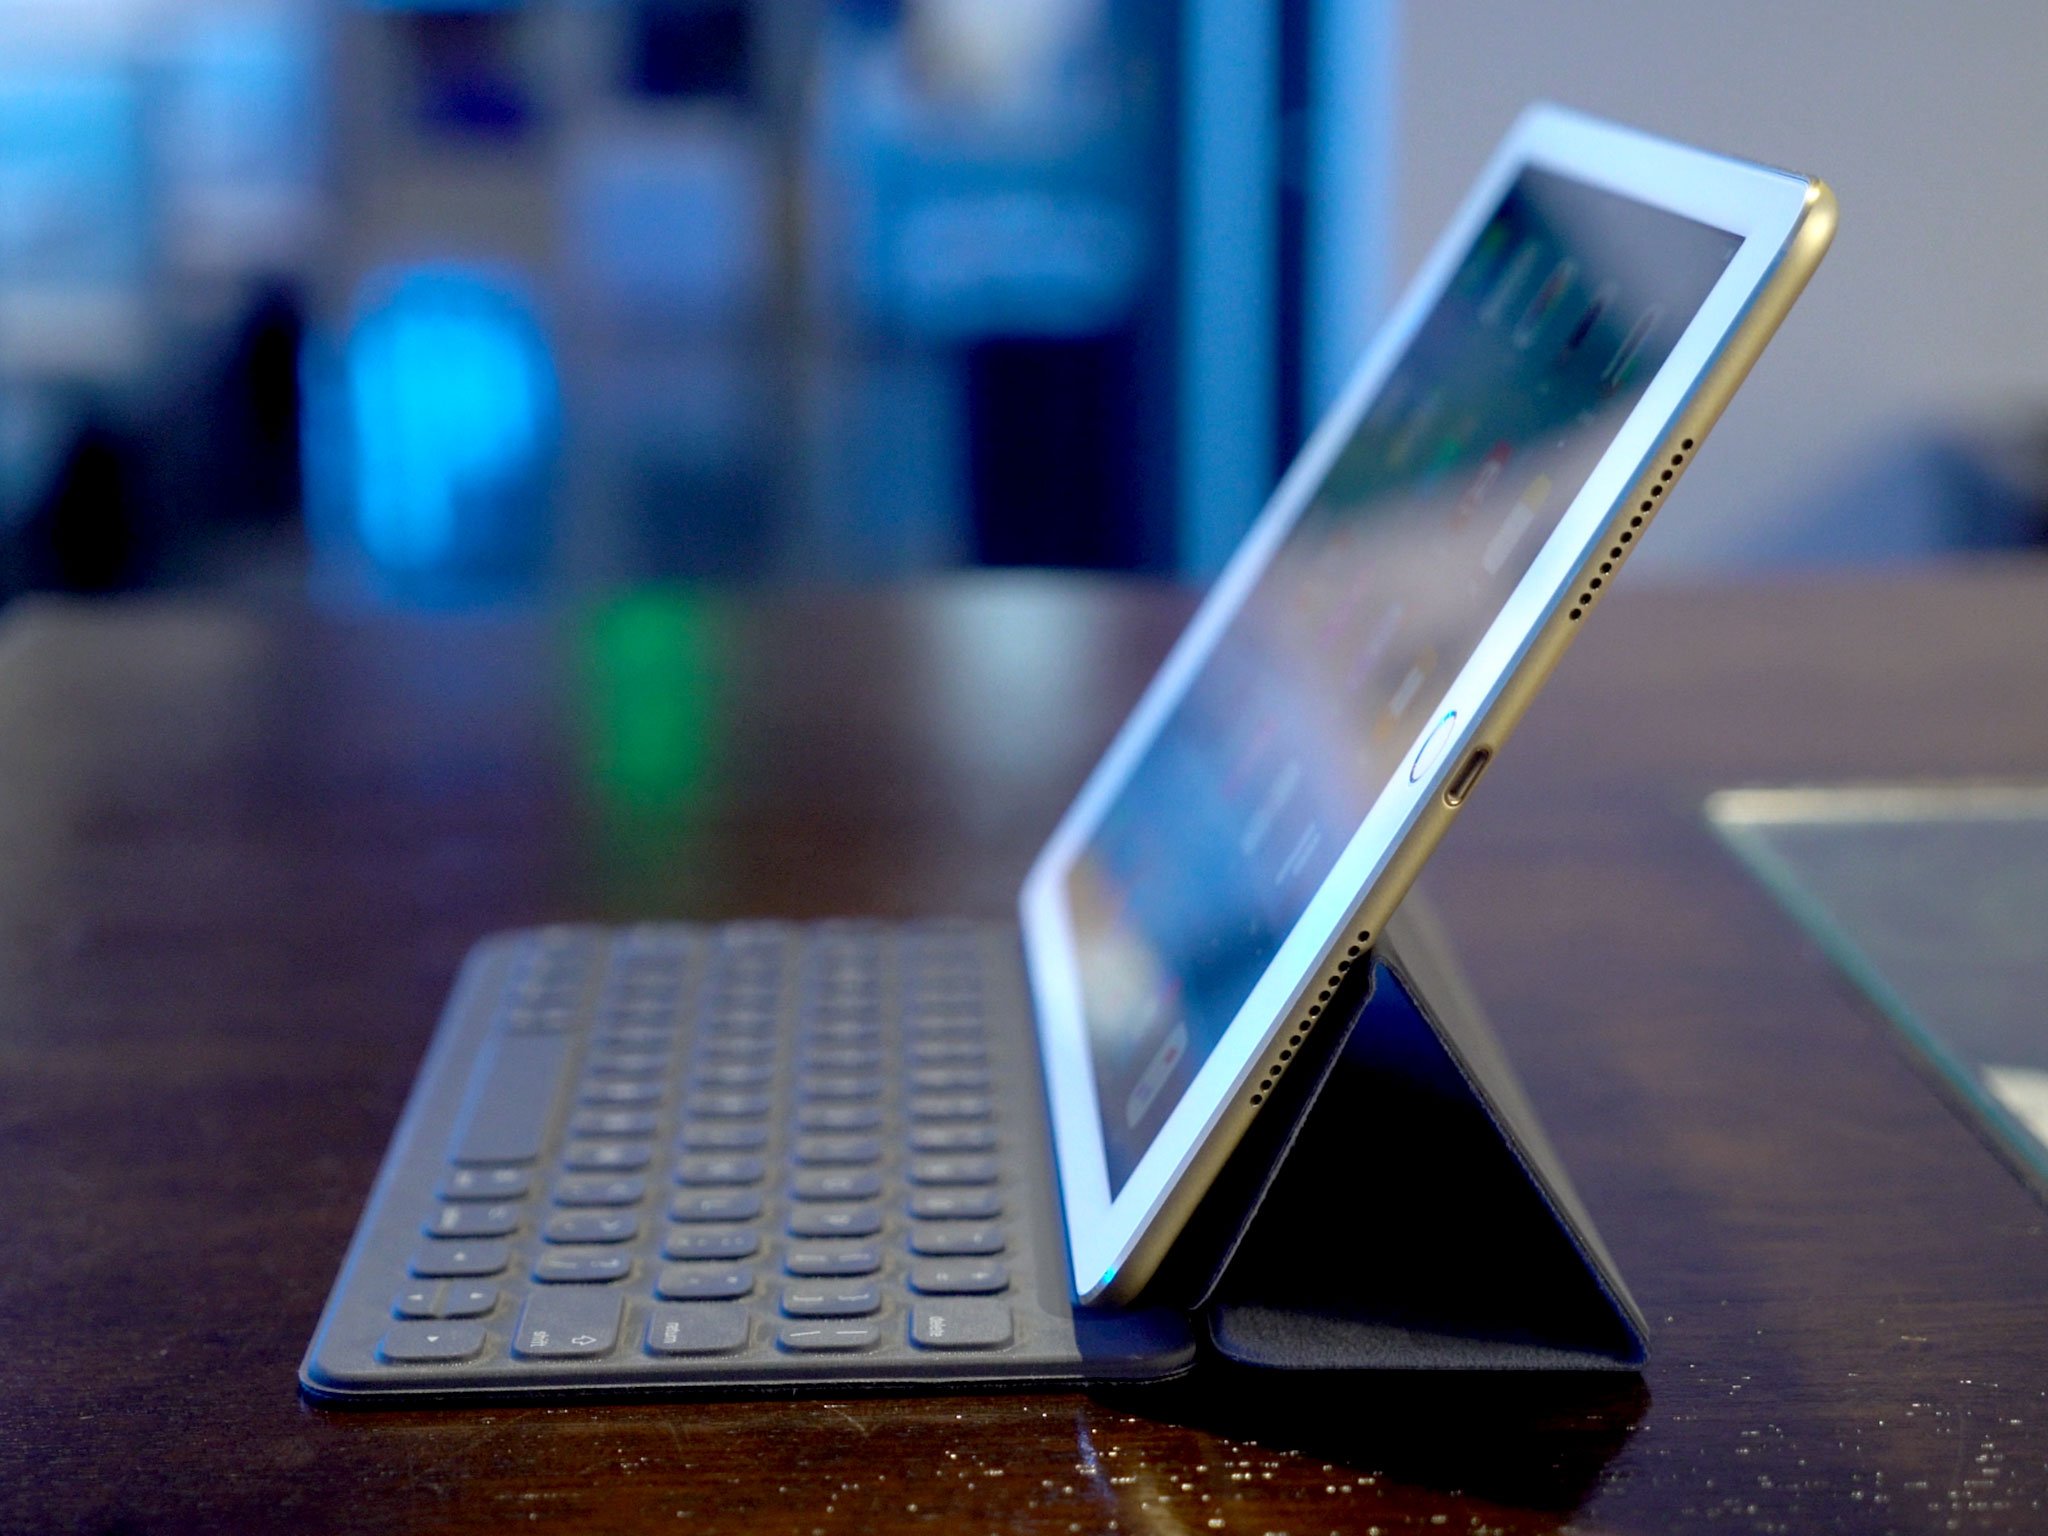 9.7-inch iPad Pro: small but powerful